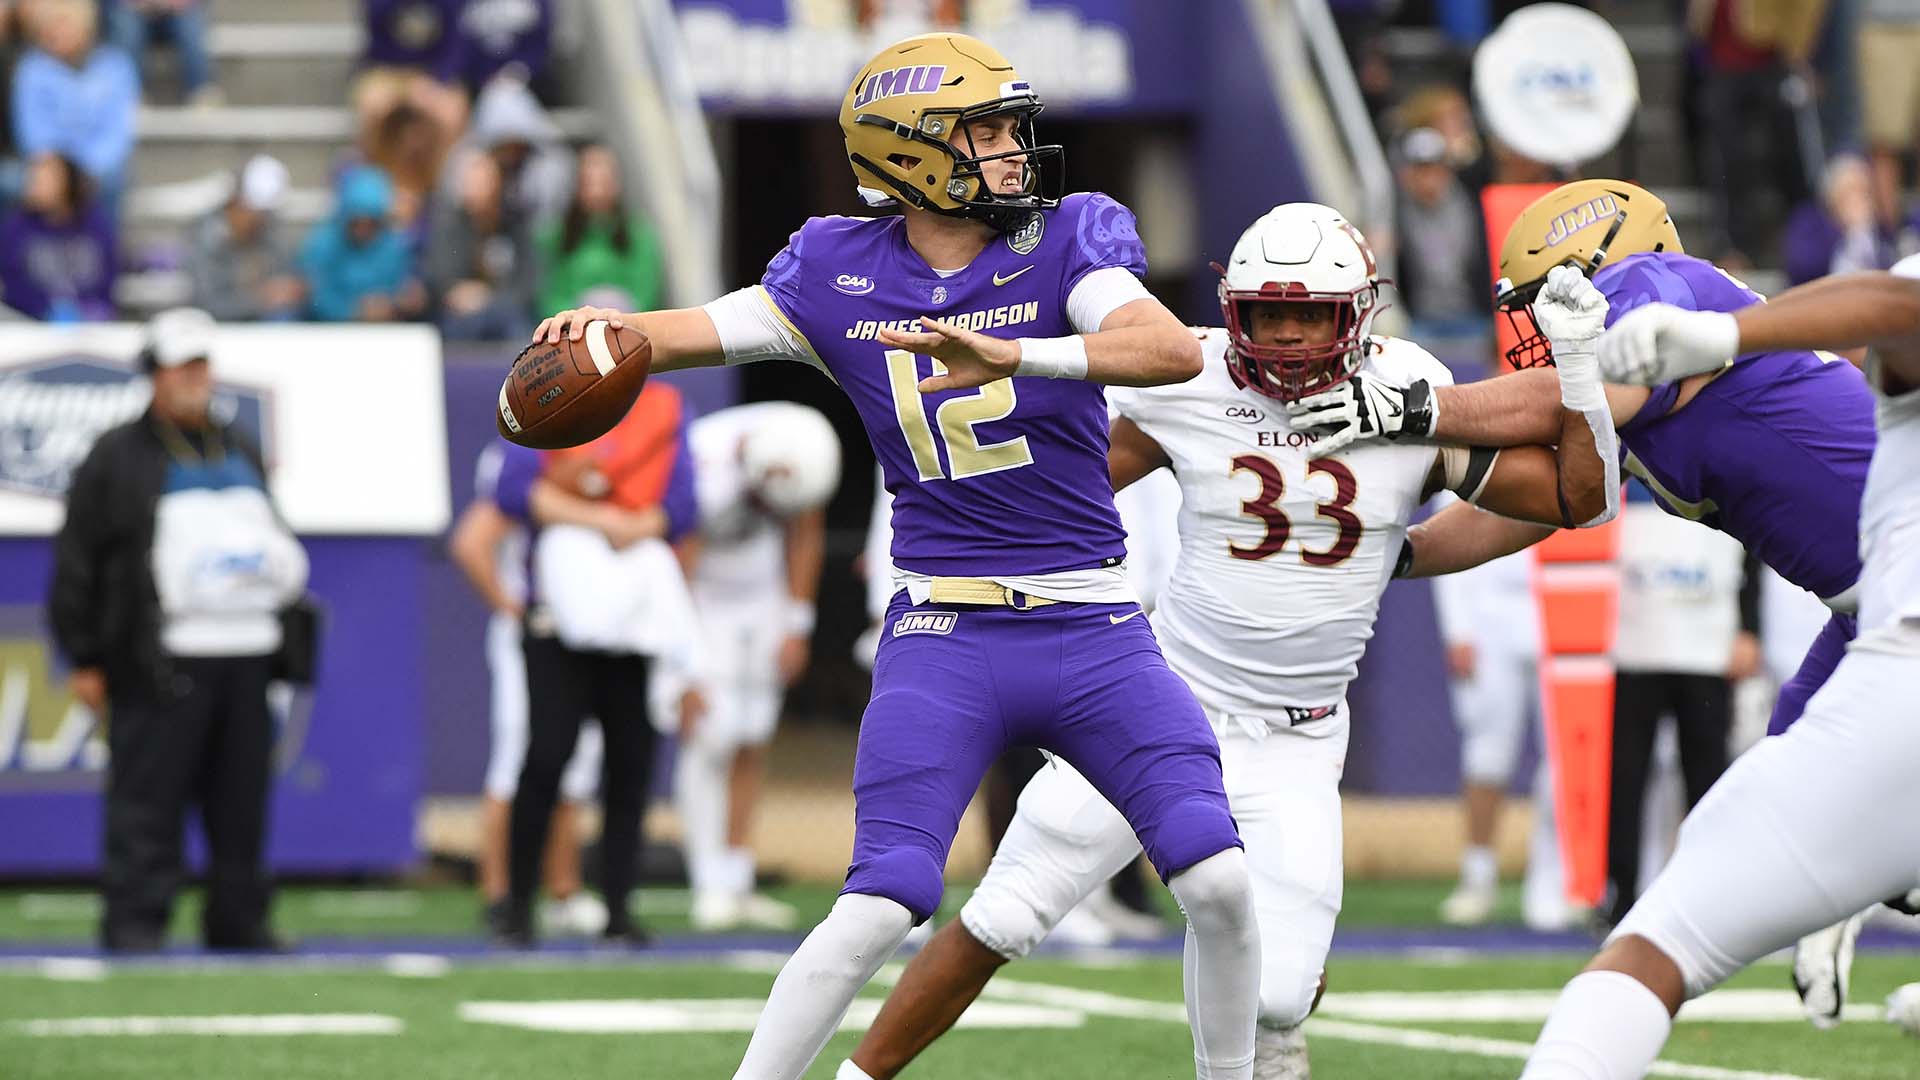 FCS Second-Round Playoff Preview: Eastern Washington at Montana and Southeastern Louisiana at James Madison